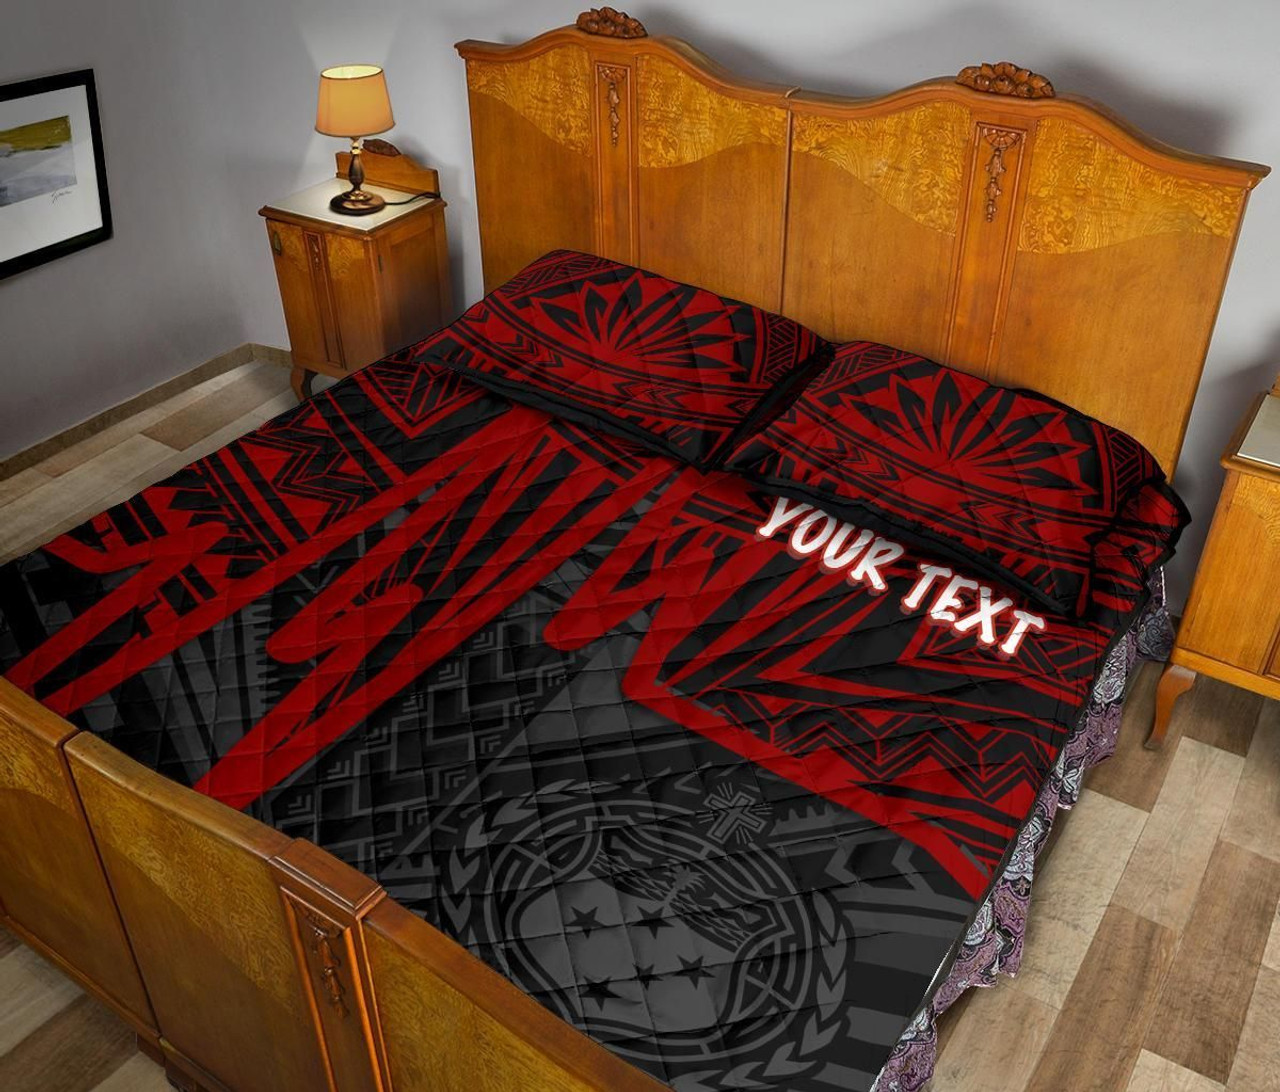 Samoa Personalised Quilt Bed Set - Samoa Seal With Polynesian Pattern In Heartbeat Style (Red) 4